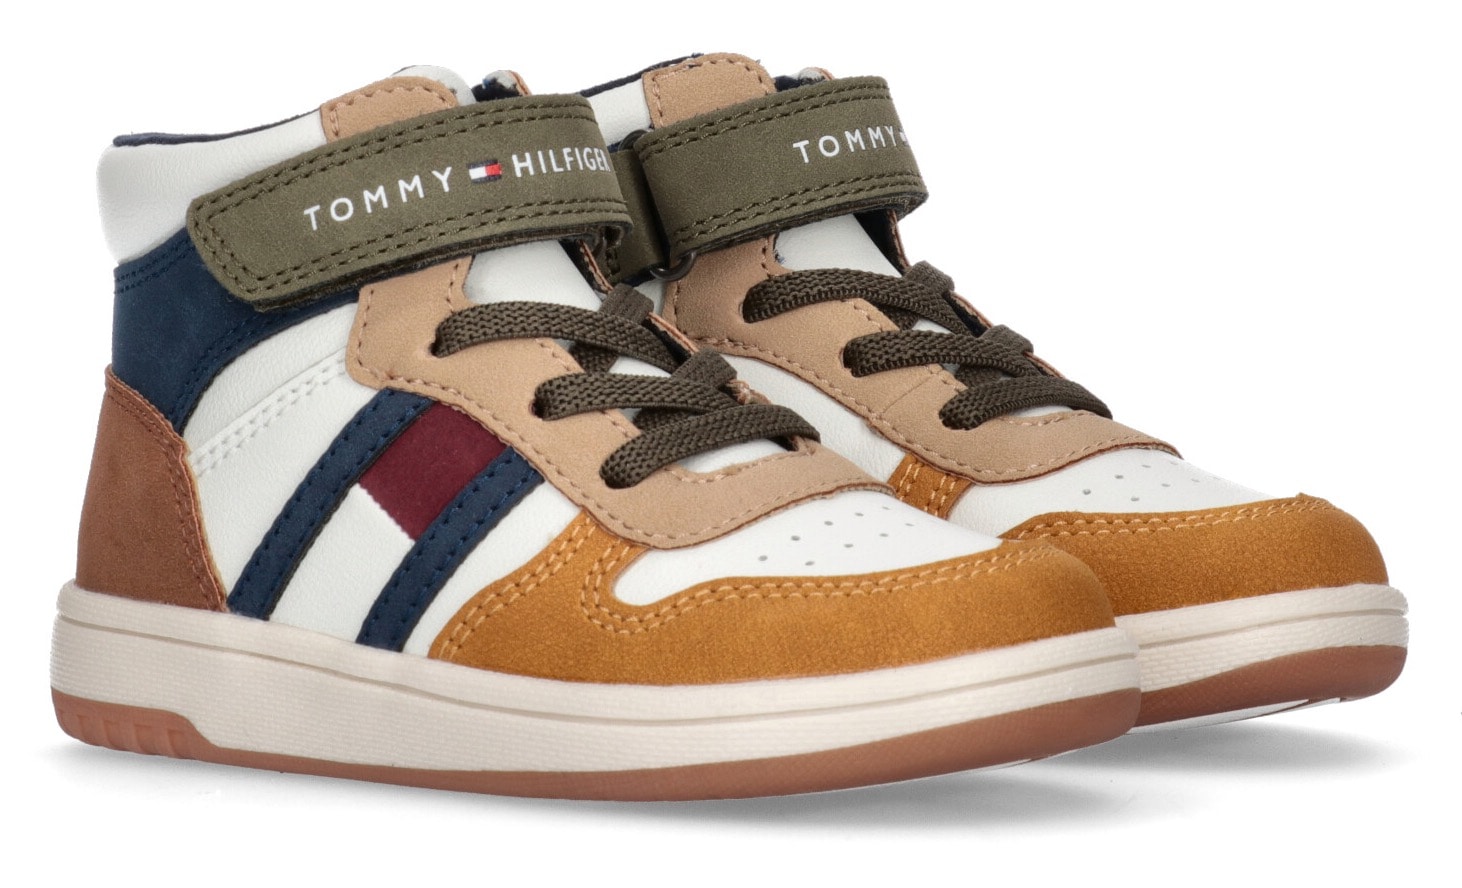 ♕ SNEAKER«, colorblocking Tommy »FLAG Hilfiger LACE-UP/VELCRO im HIGH Look bei modischen Sneaker TOP